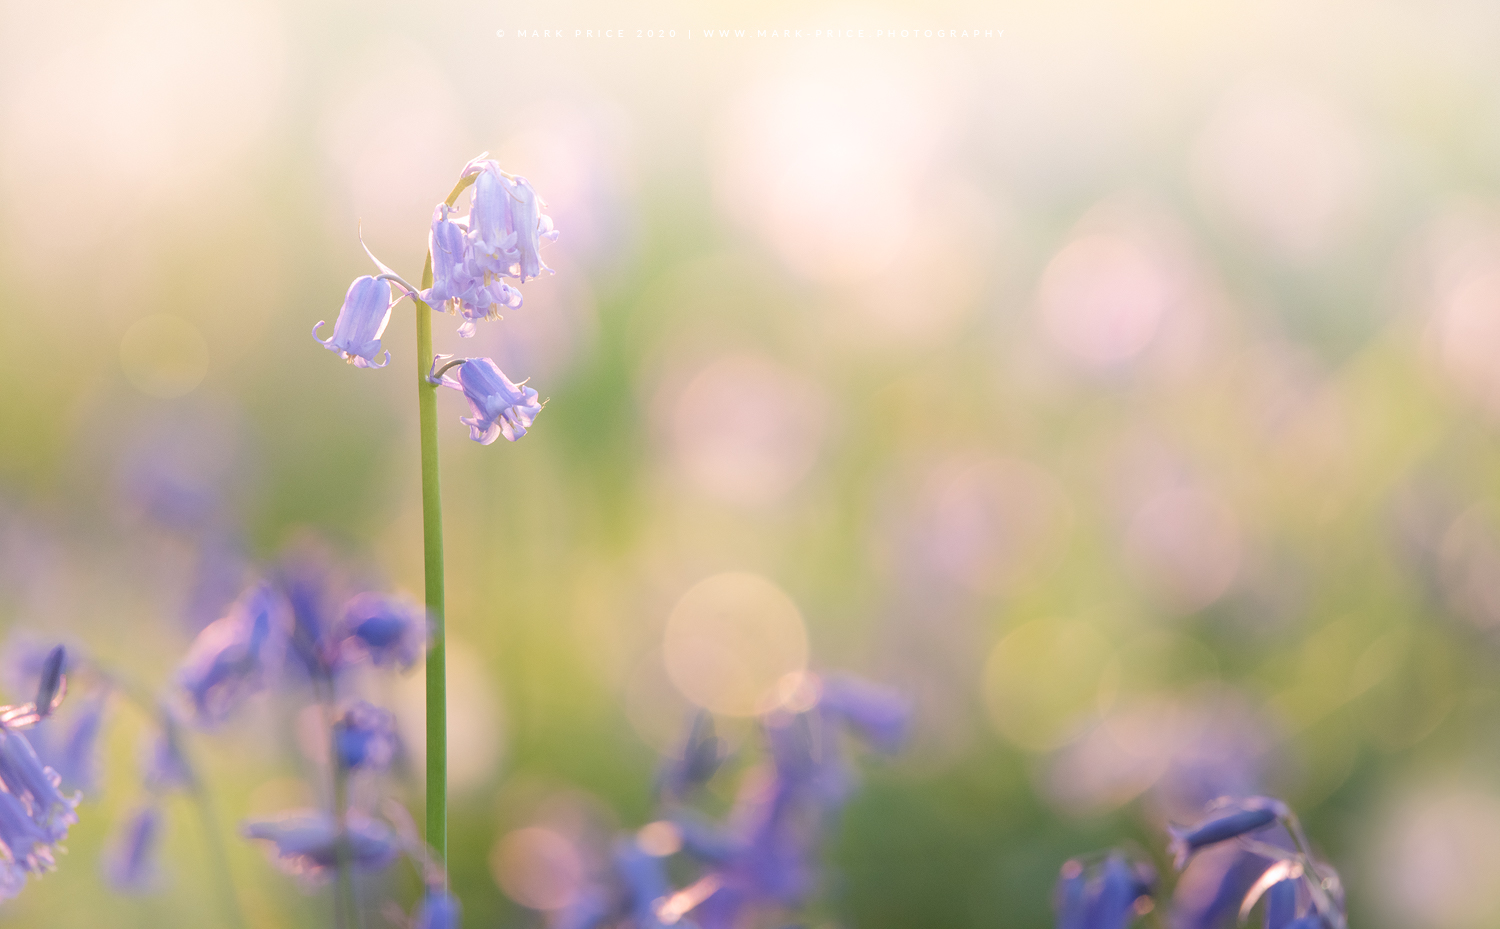 A lone bluebell stands out in a spring lit field